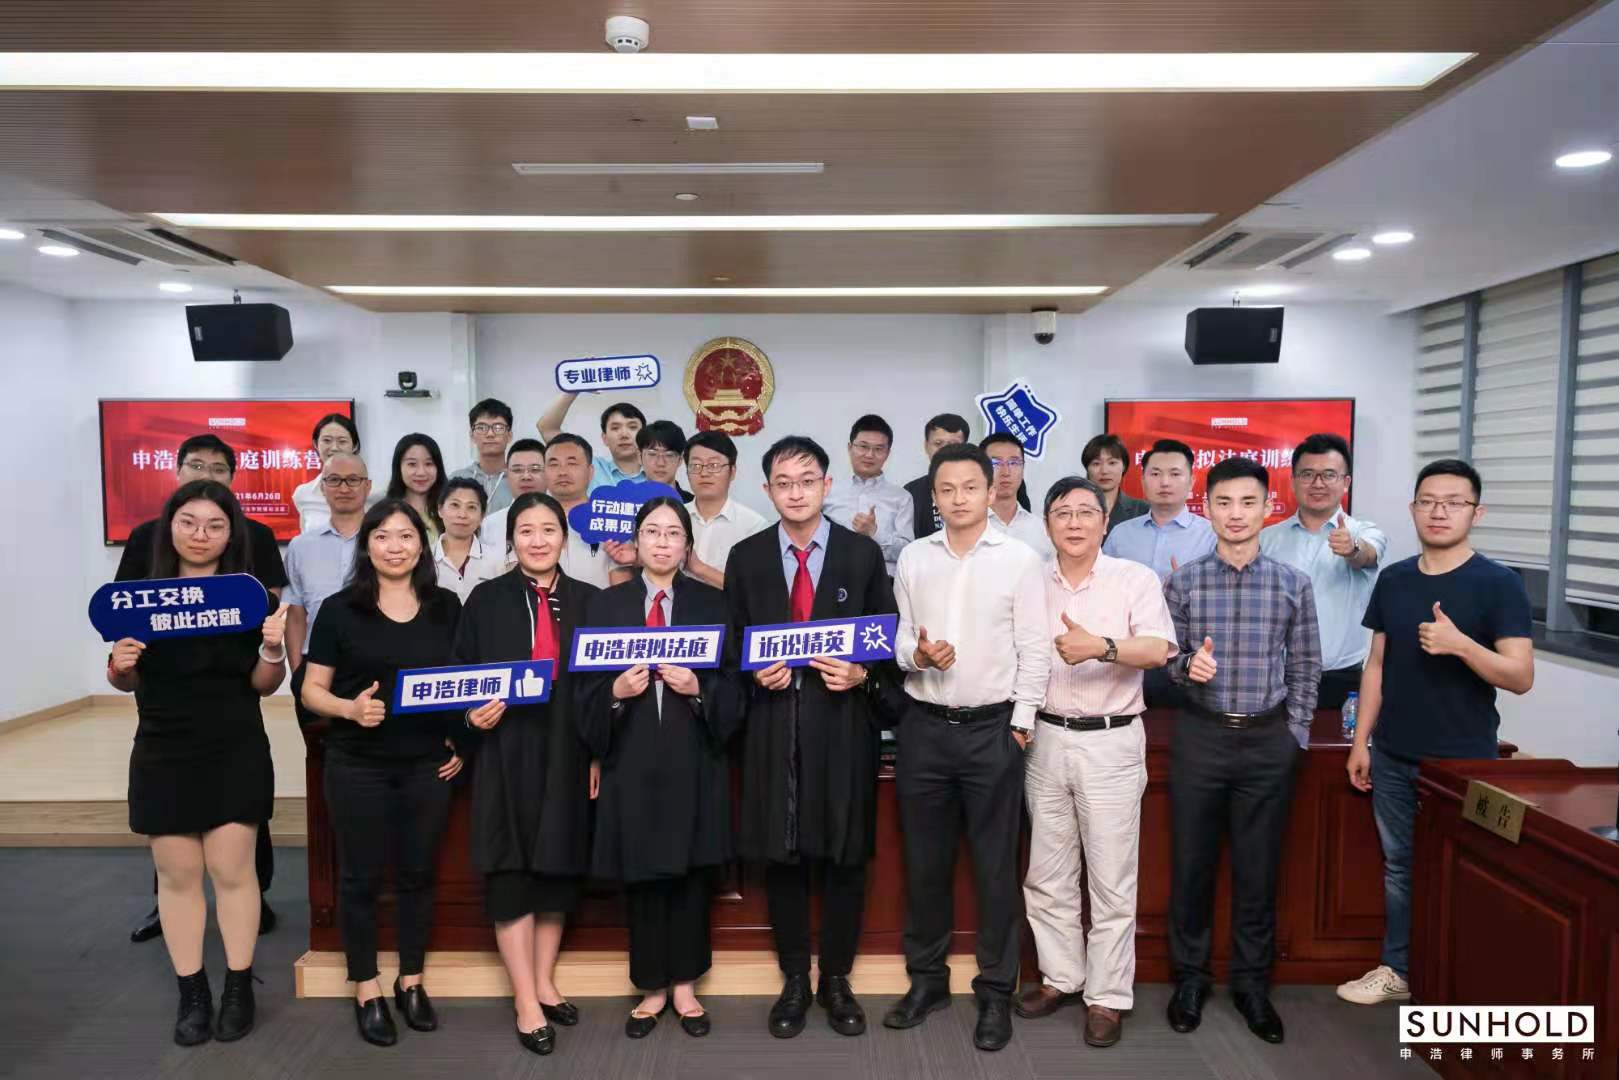 The First Sunhold Moot Court Training Camp was held successfully